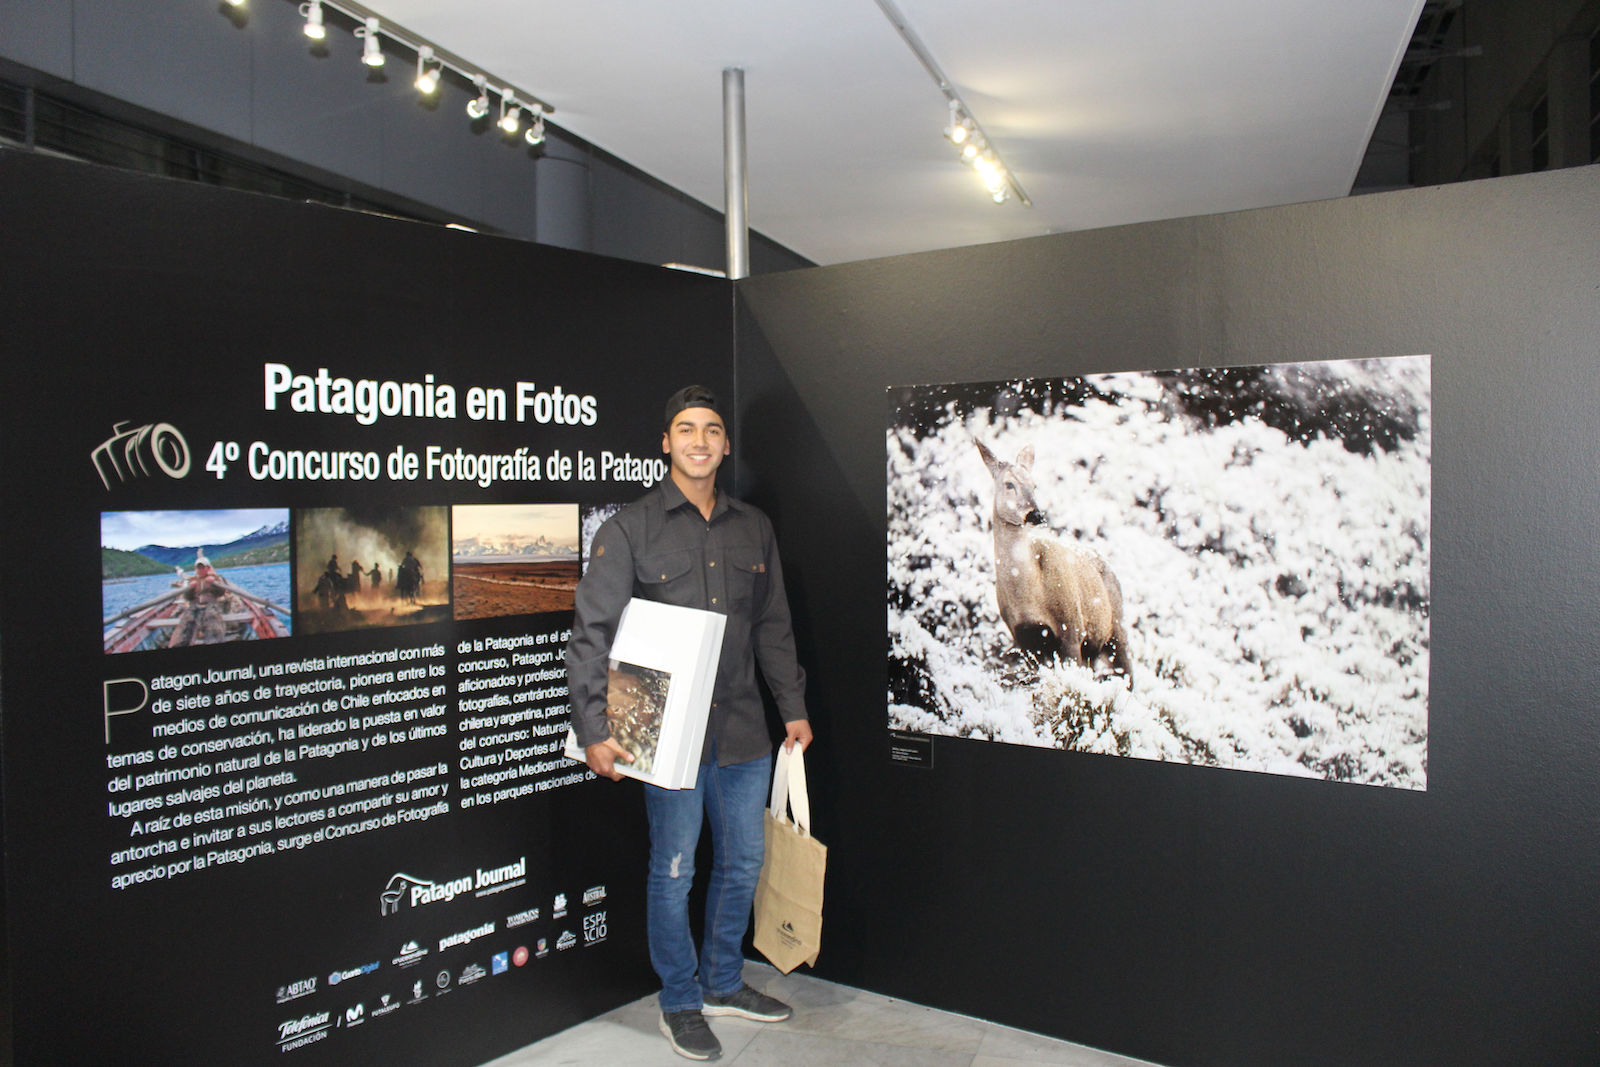 Grand prize winner, Matias Mondaca, with his prizes and in front of his winning photo of a huemul at Cerro Castillo National Park.